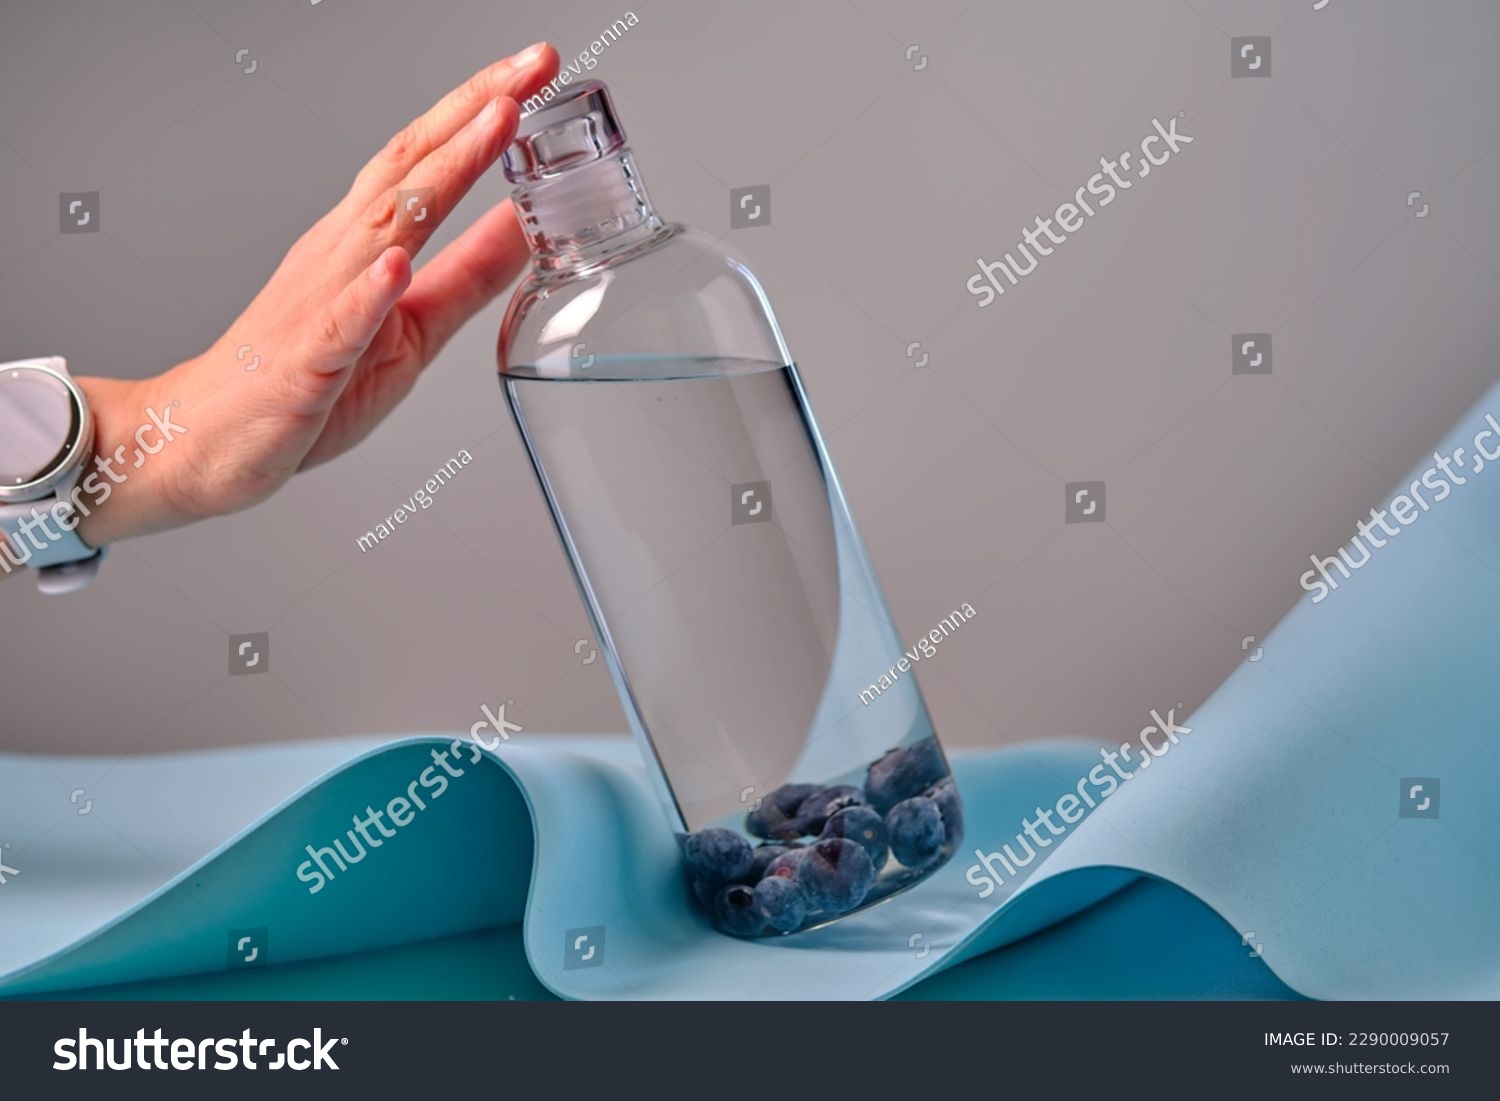 A woman's hand reaches for a glass bottle of water with blueberries. #2290009057